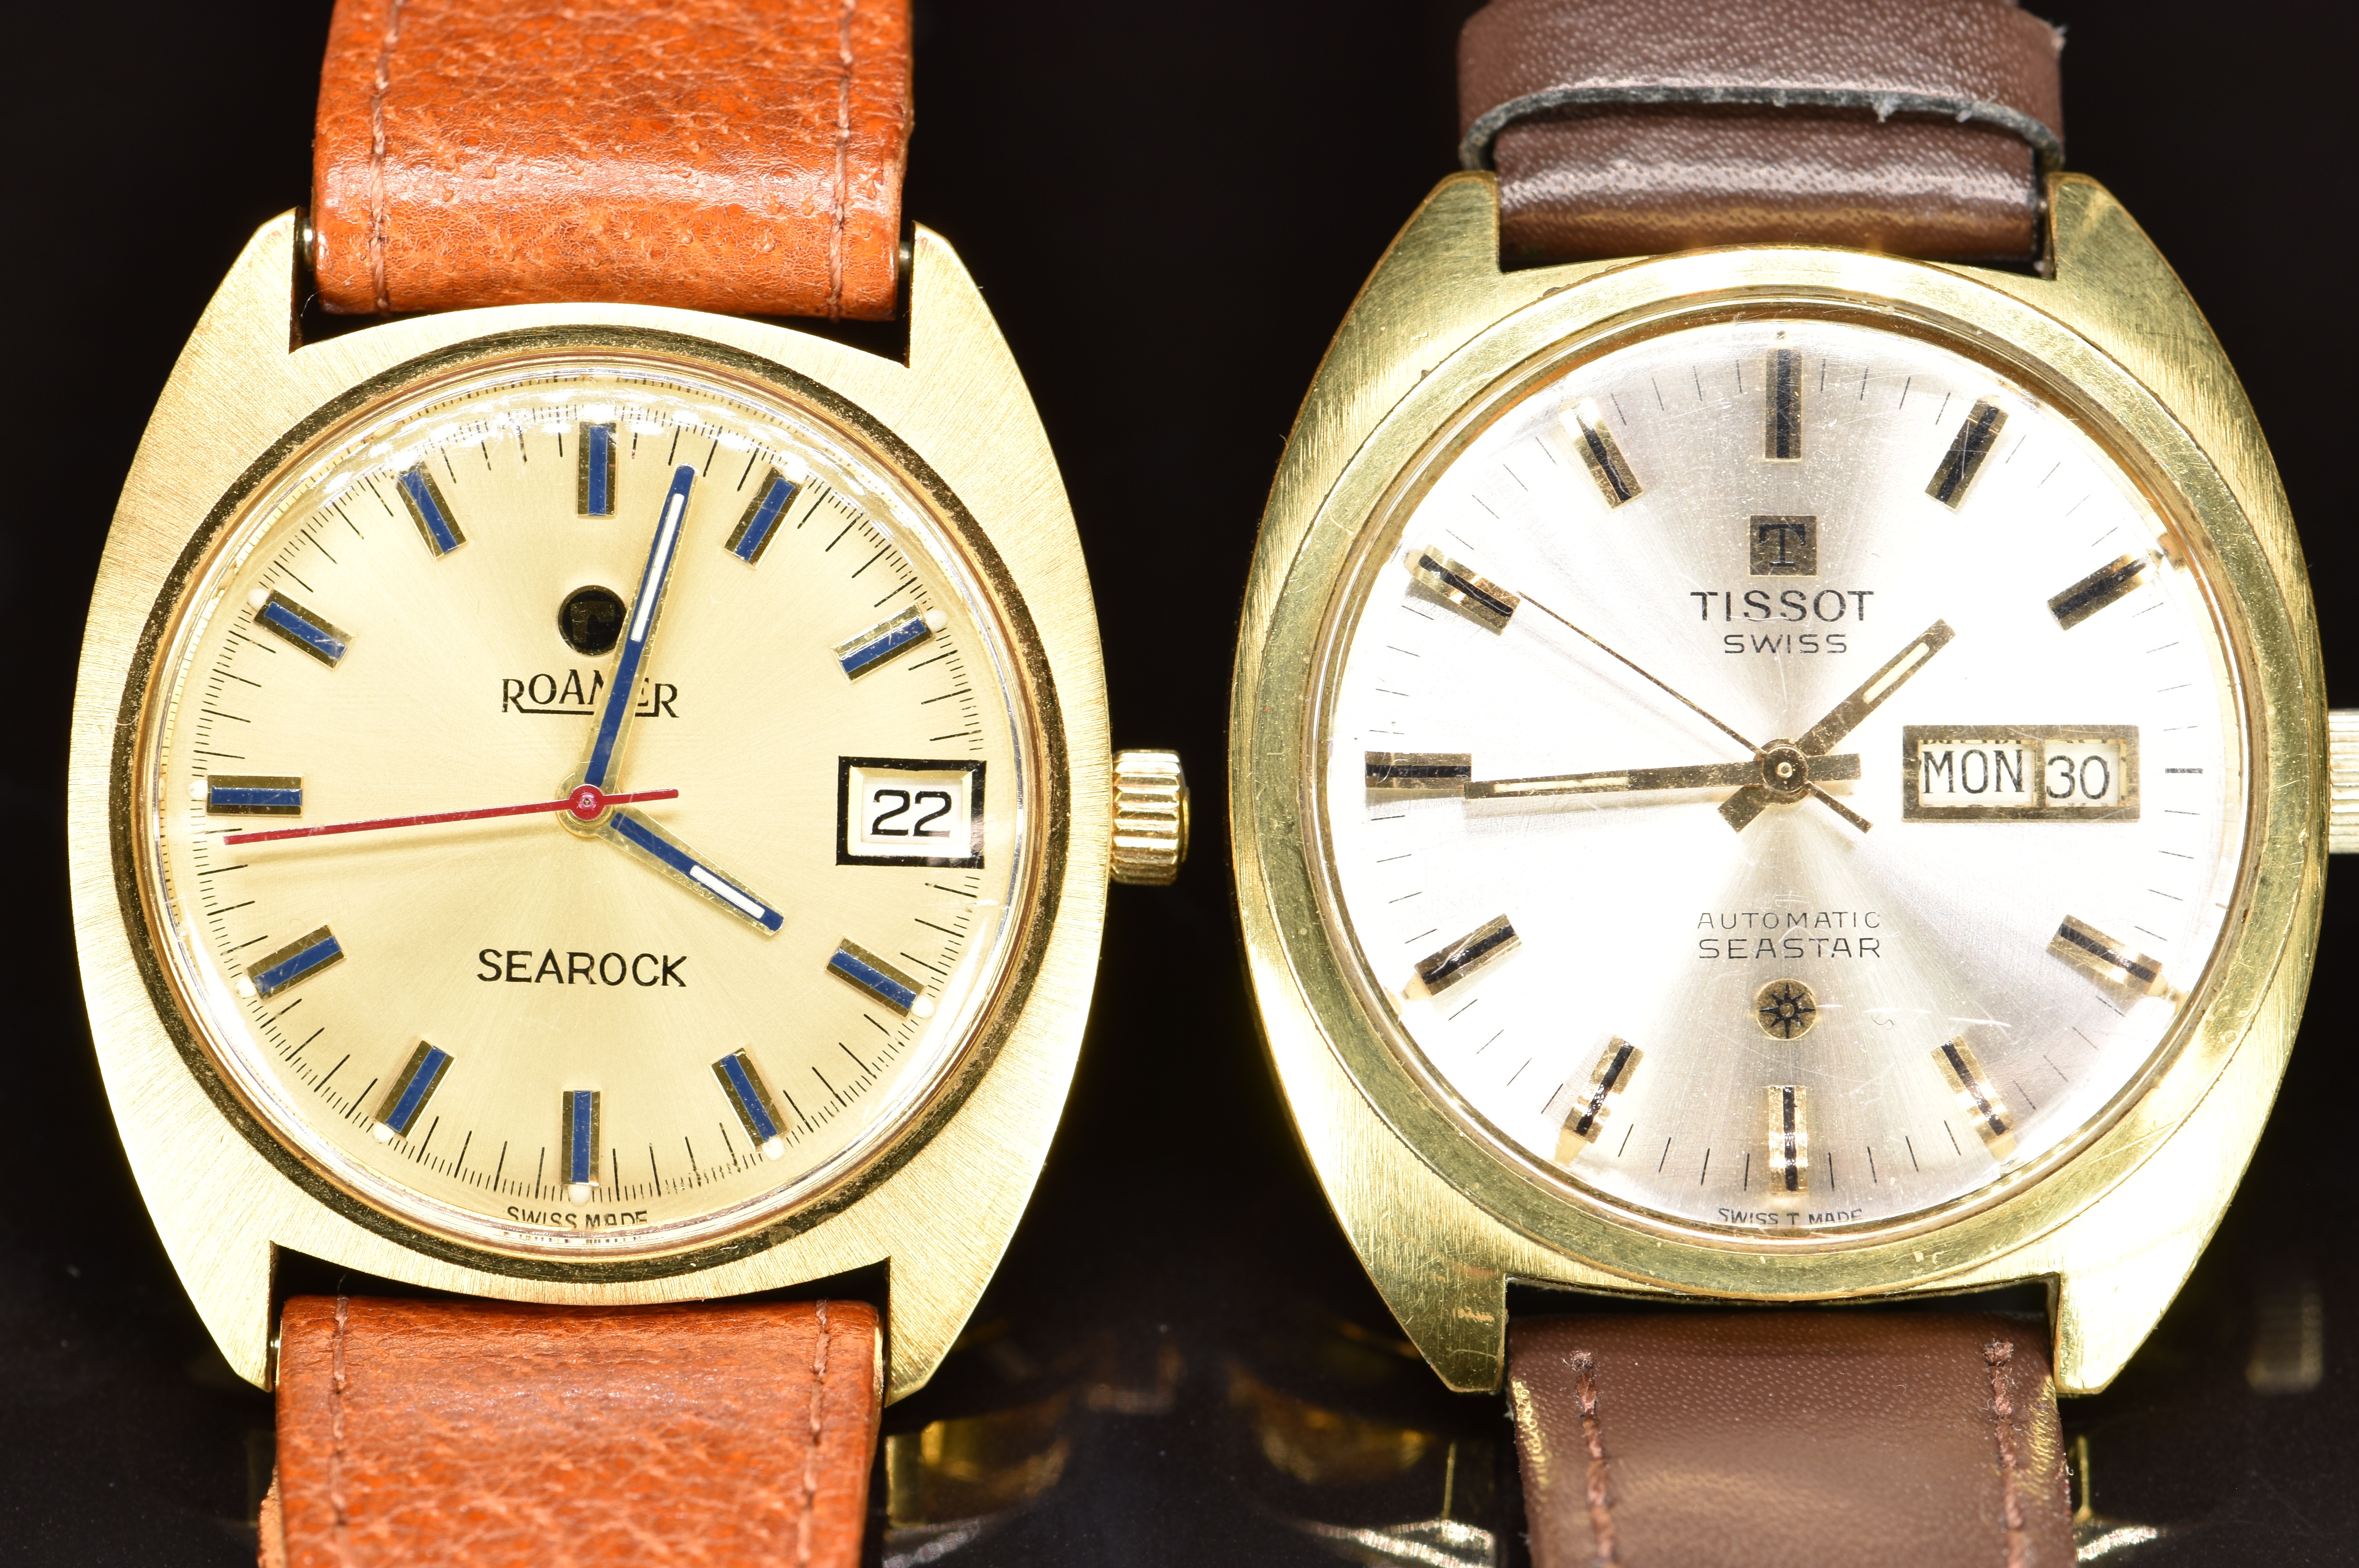 Two gentleman's wristwatches Tissot Seastar automatic with day and date aperture, gold hands and